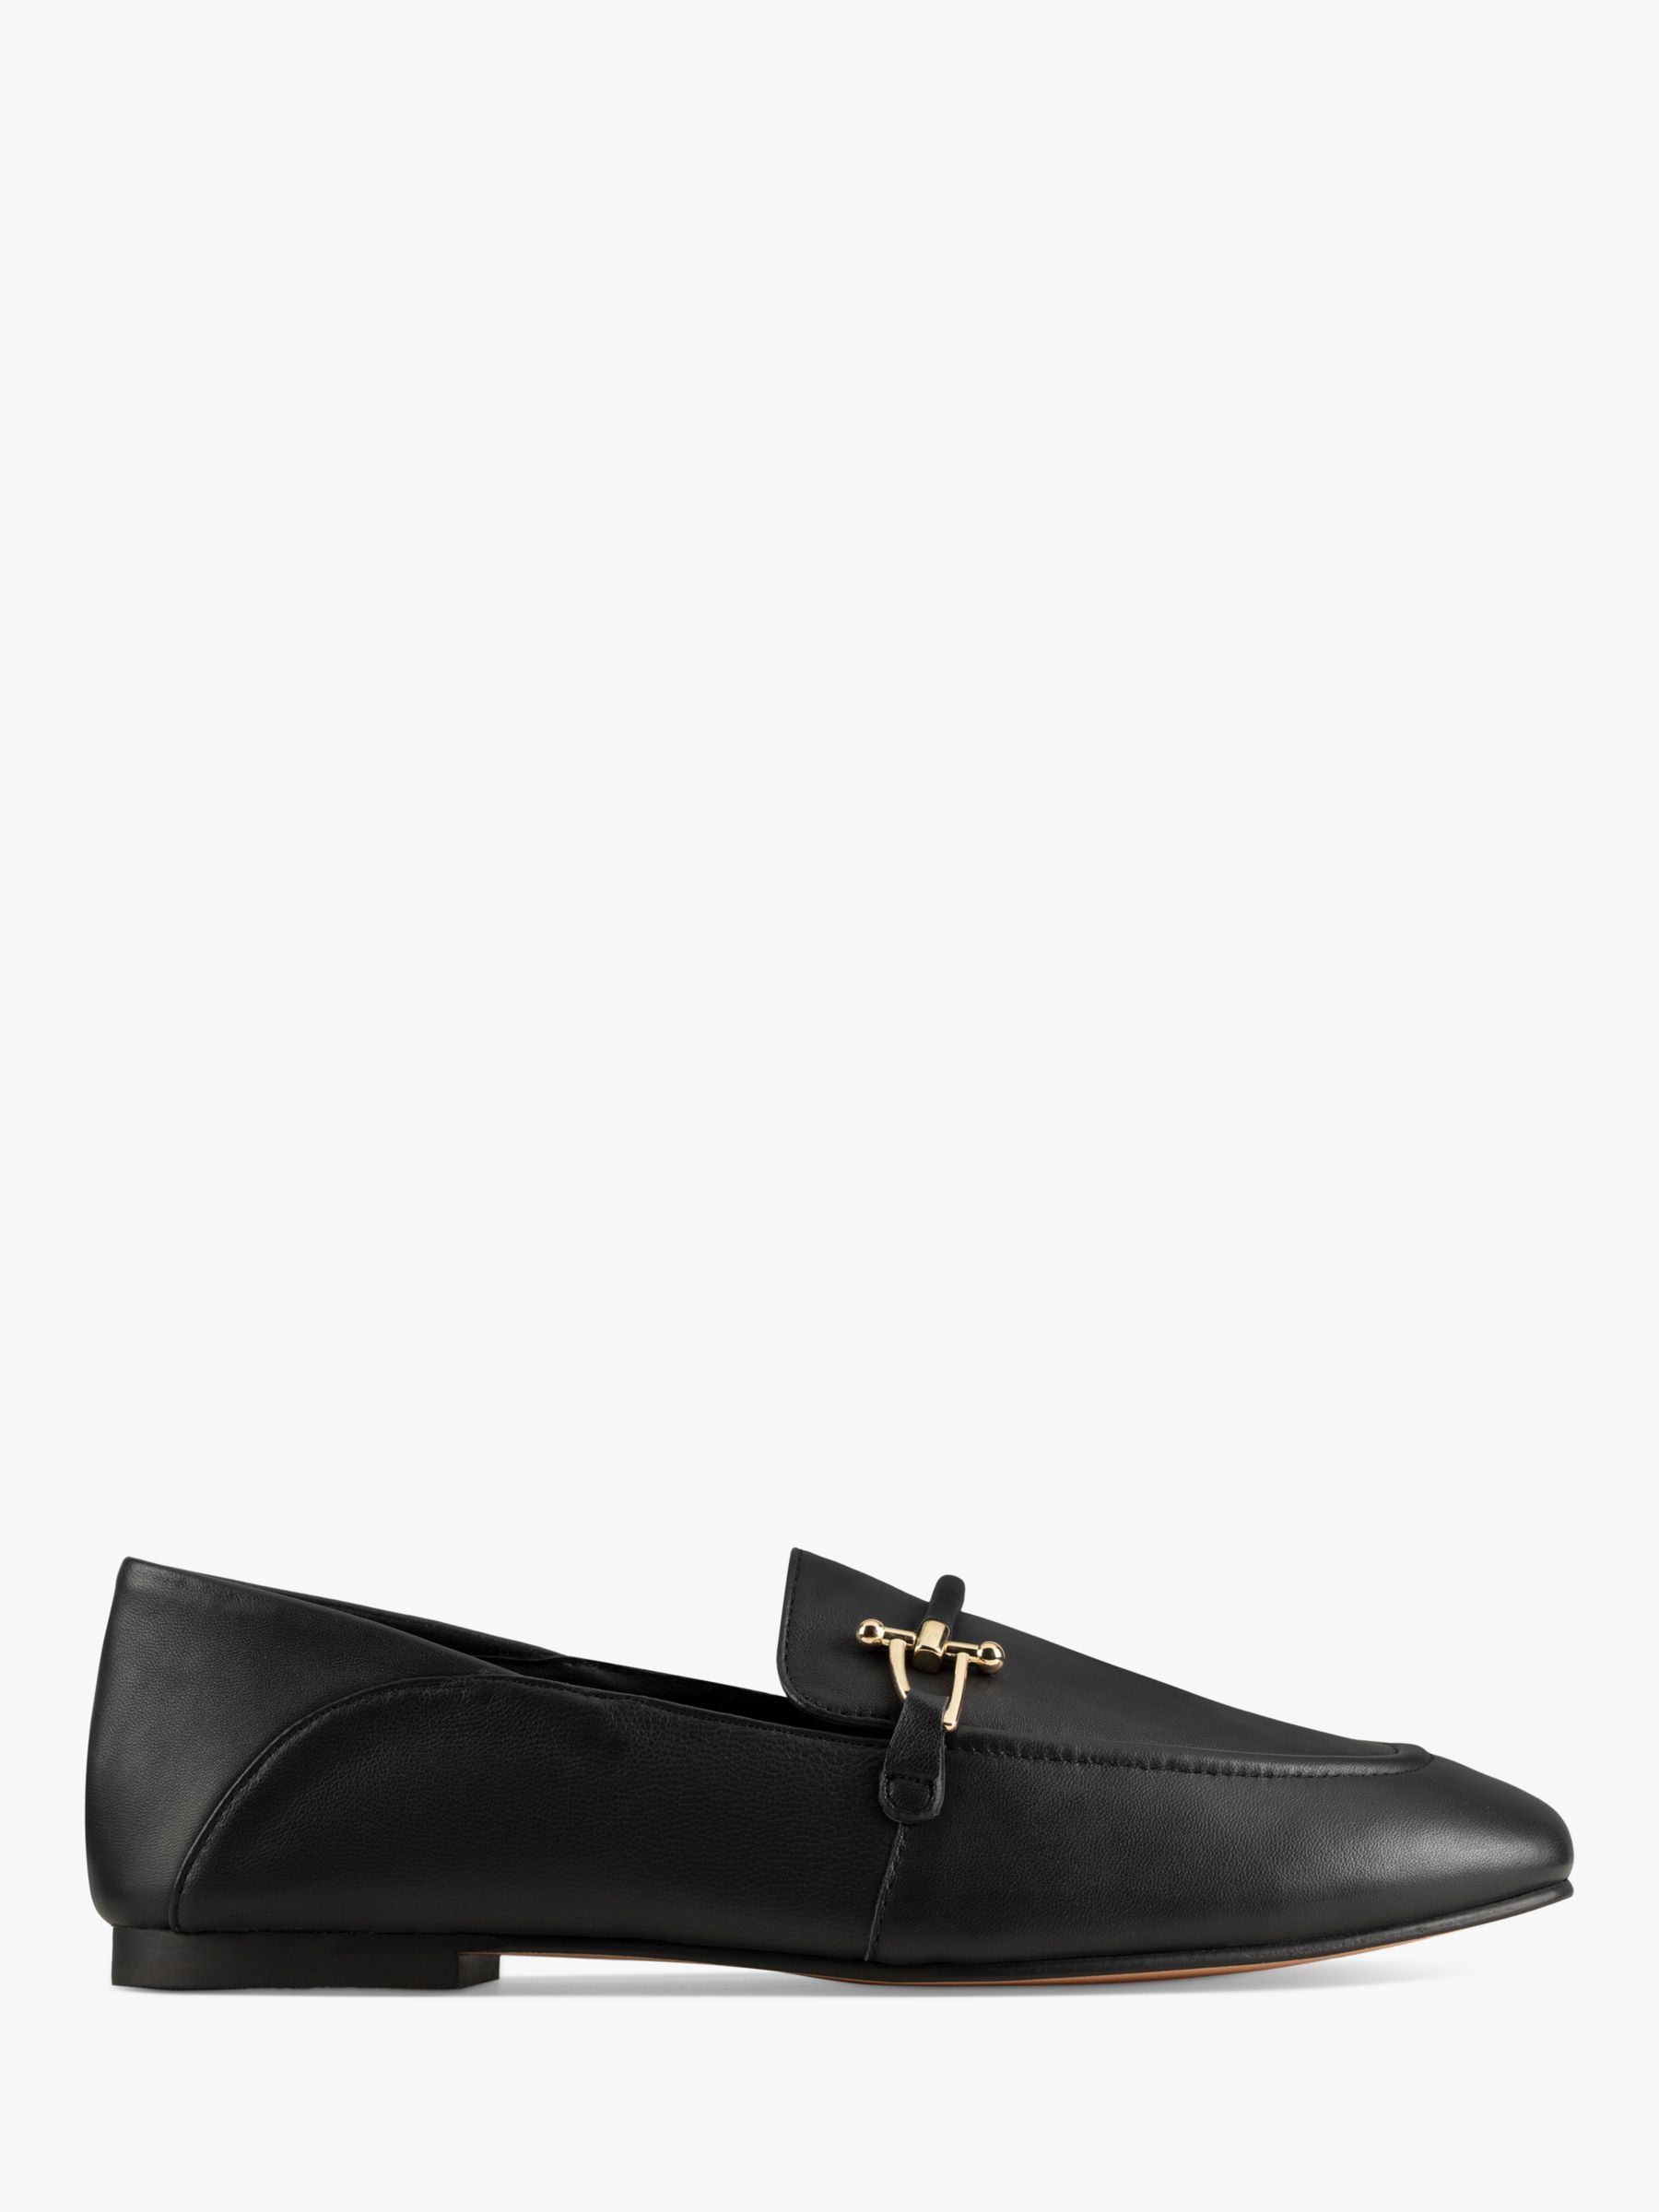 Clarks Pure 2 Leather Loafers, Black at John Lewis & Partners